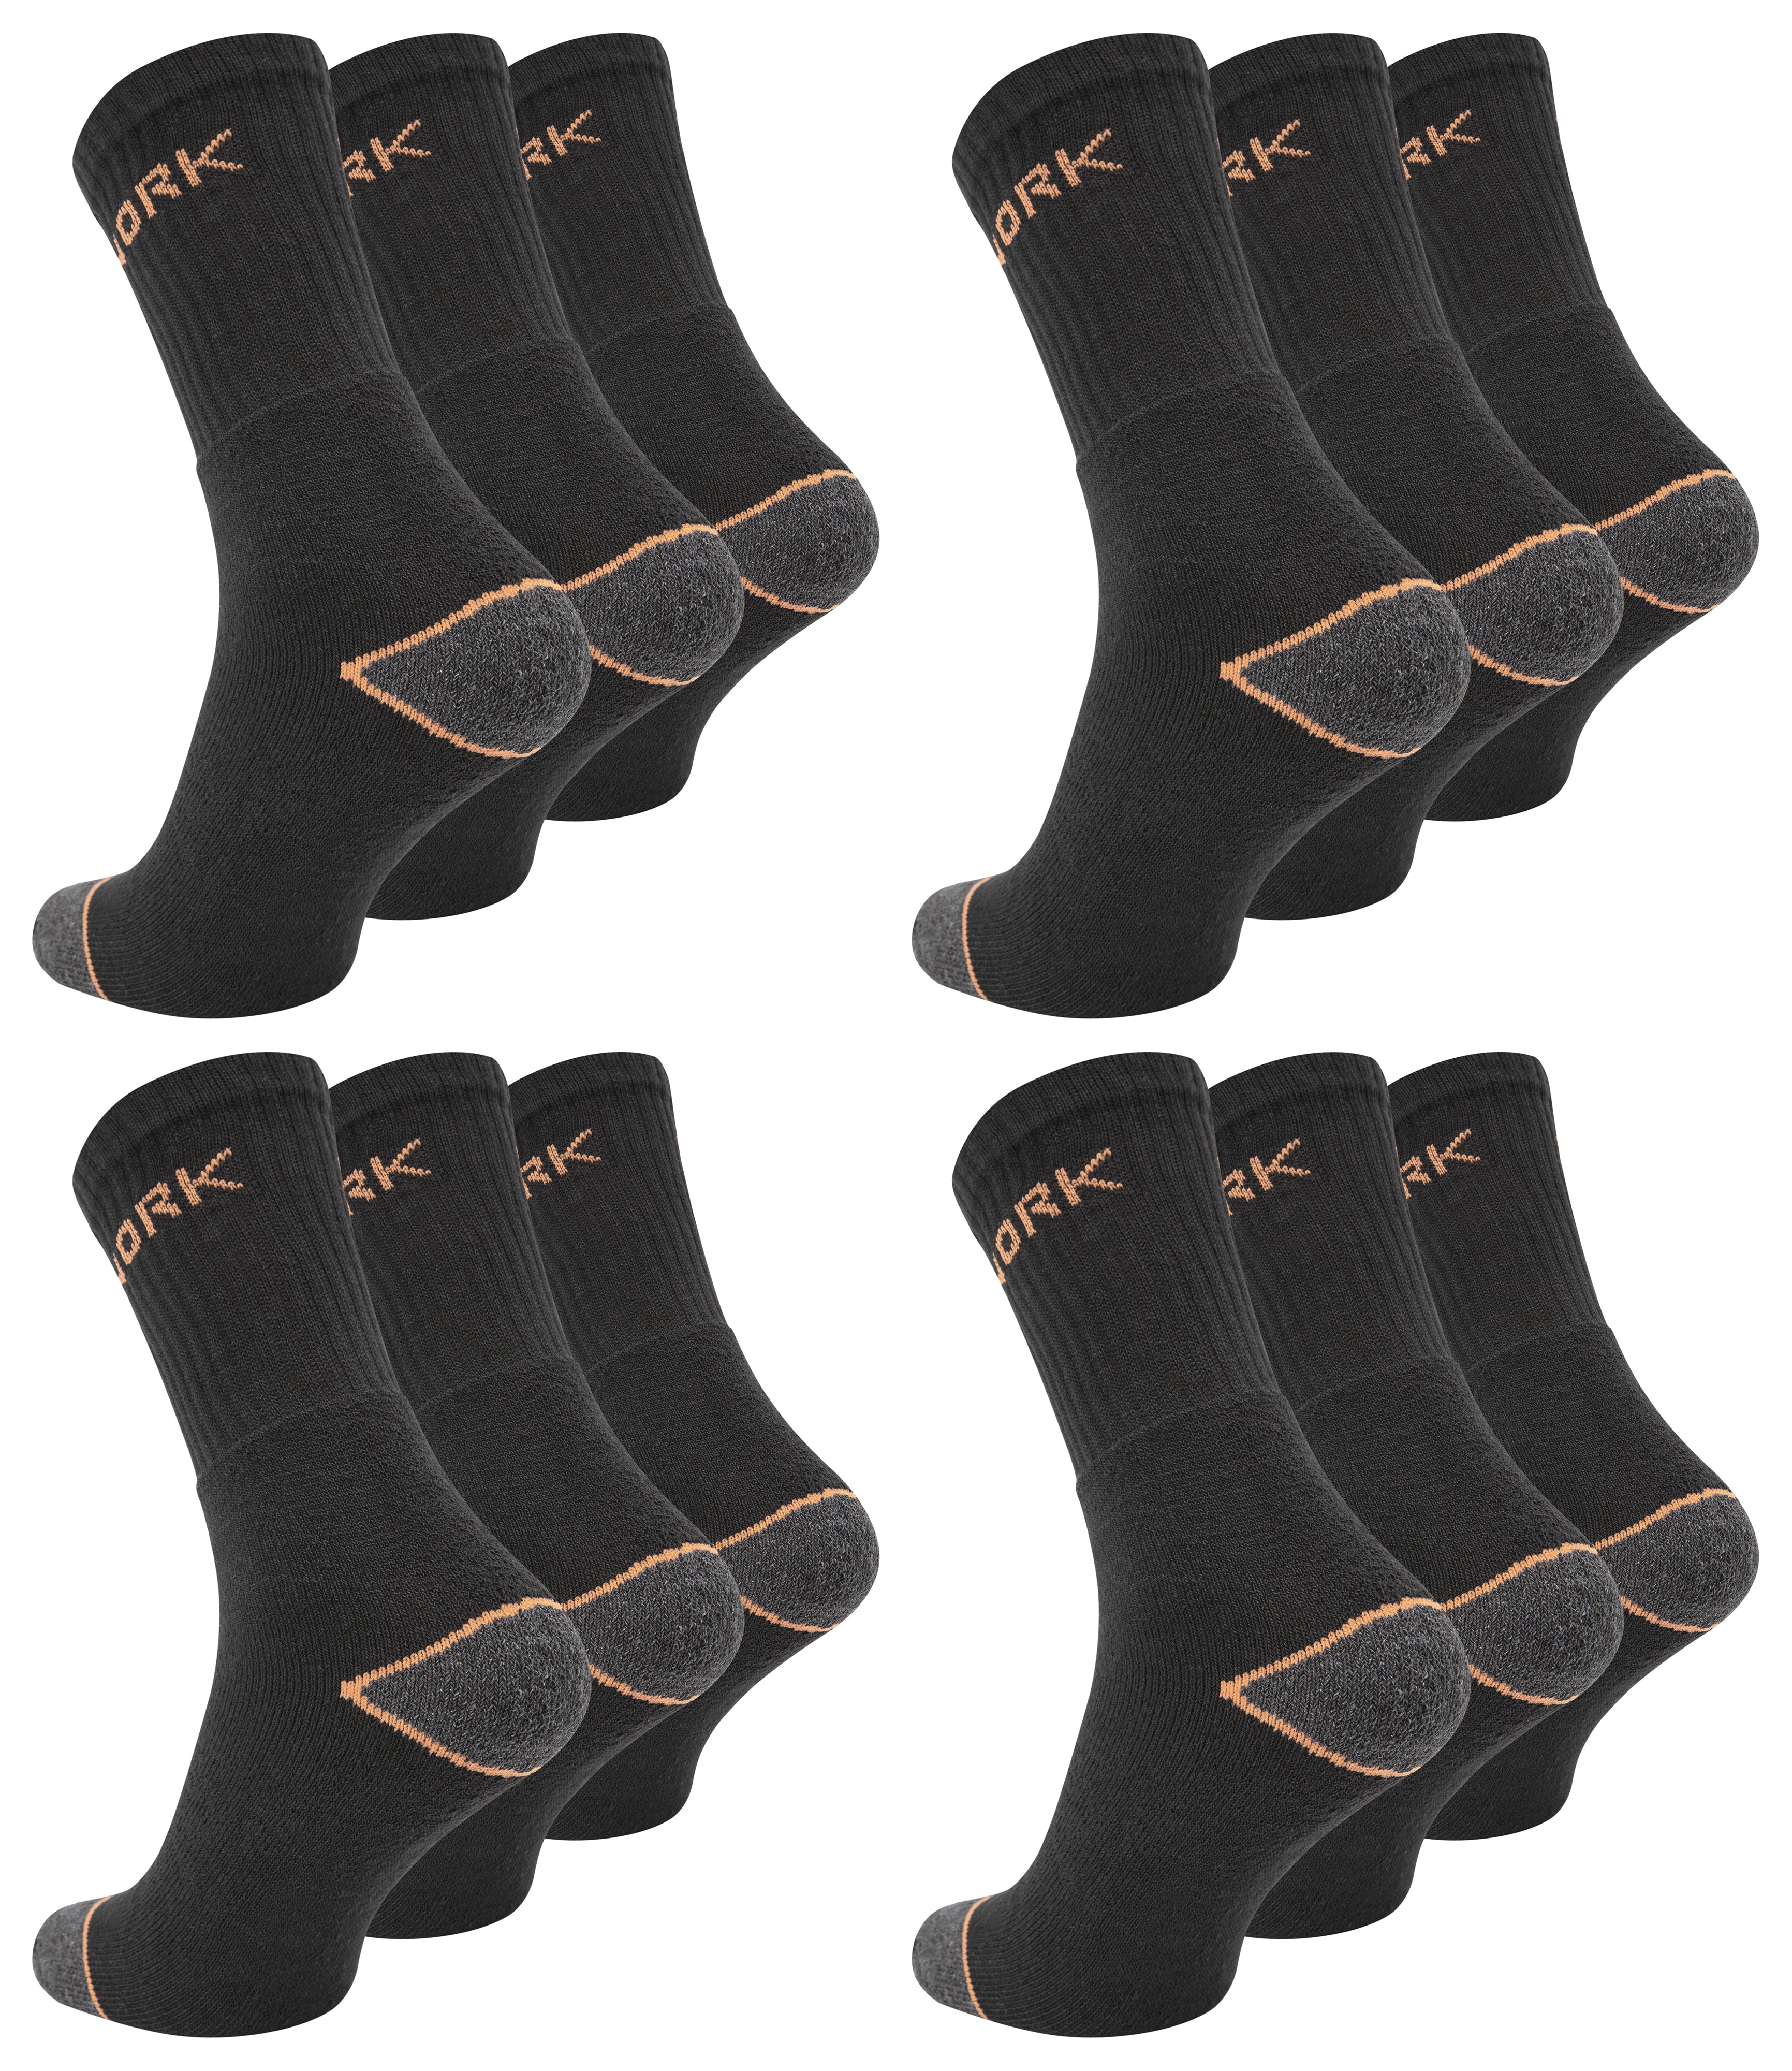 Paolo Renzo® work socks 3/6/12/18 36 or - Traumpreisfabrik 39/42 pairs – sizes 43/46 and